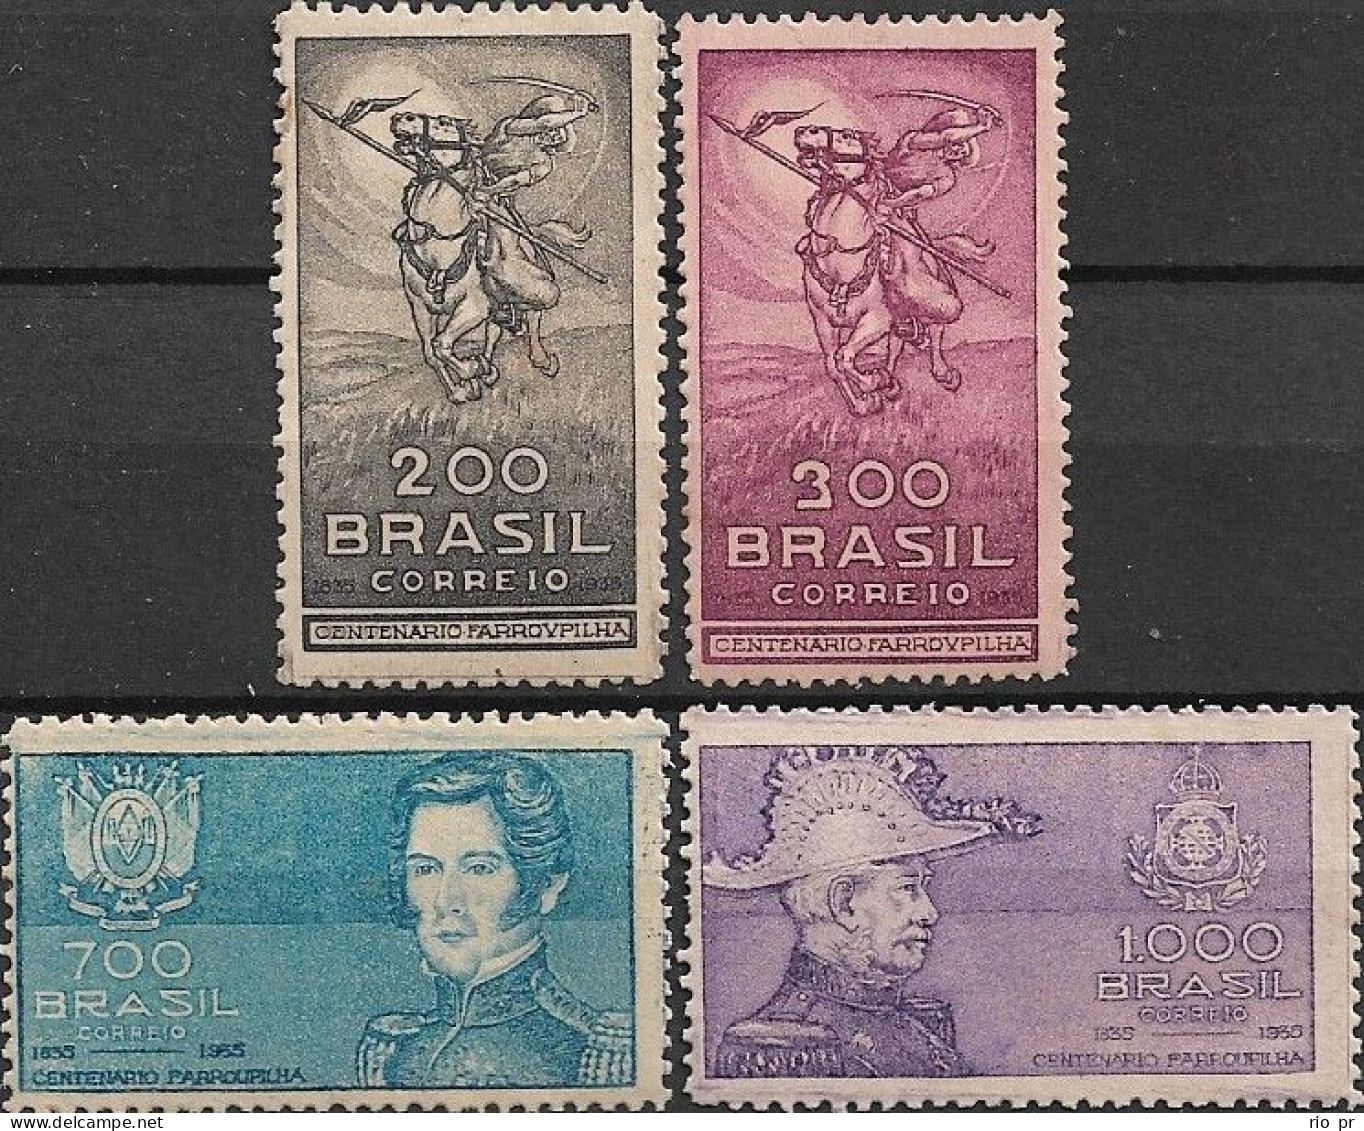 BRAZIL - COMPLETE SET CENTENARY OF FARRAPOS REVOLUTION 1935/6 - MNH/MLH/MH - Unused Stamps